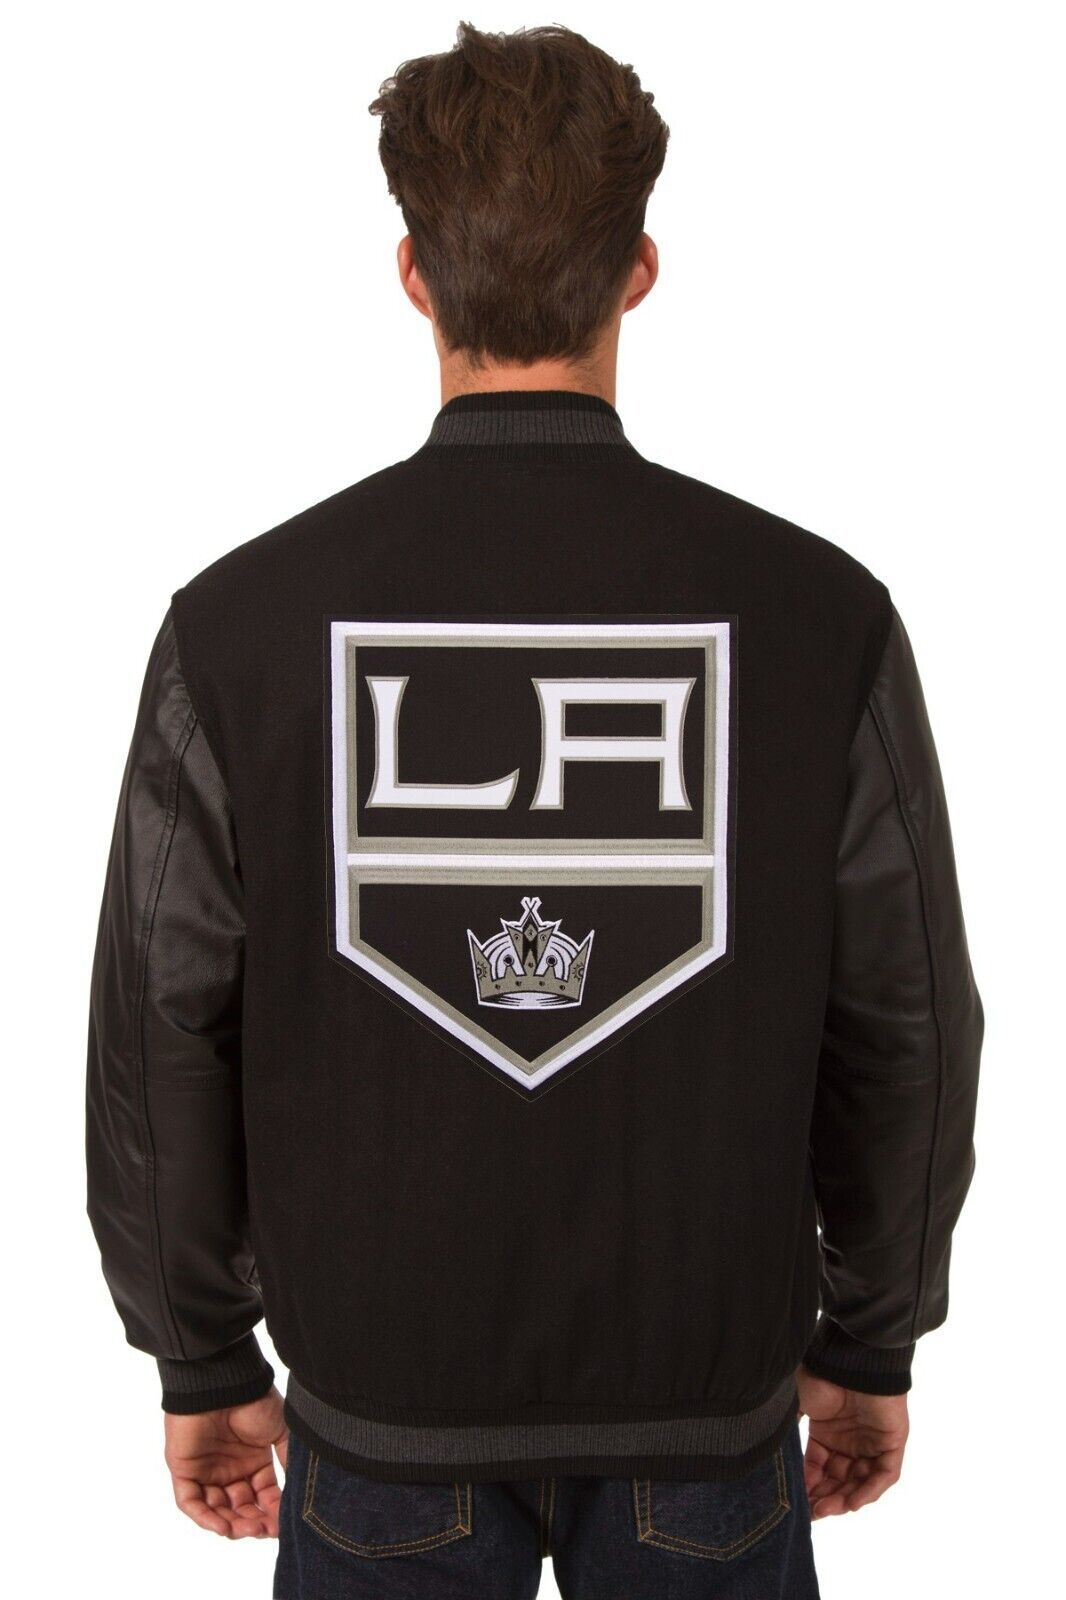 Primary image for NHL Los Angeles Kings Wool Leather Reversible Jacket Embroidered Logos Black JHD